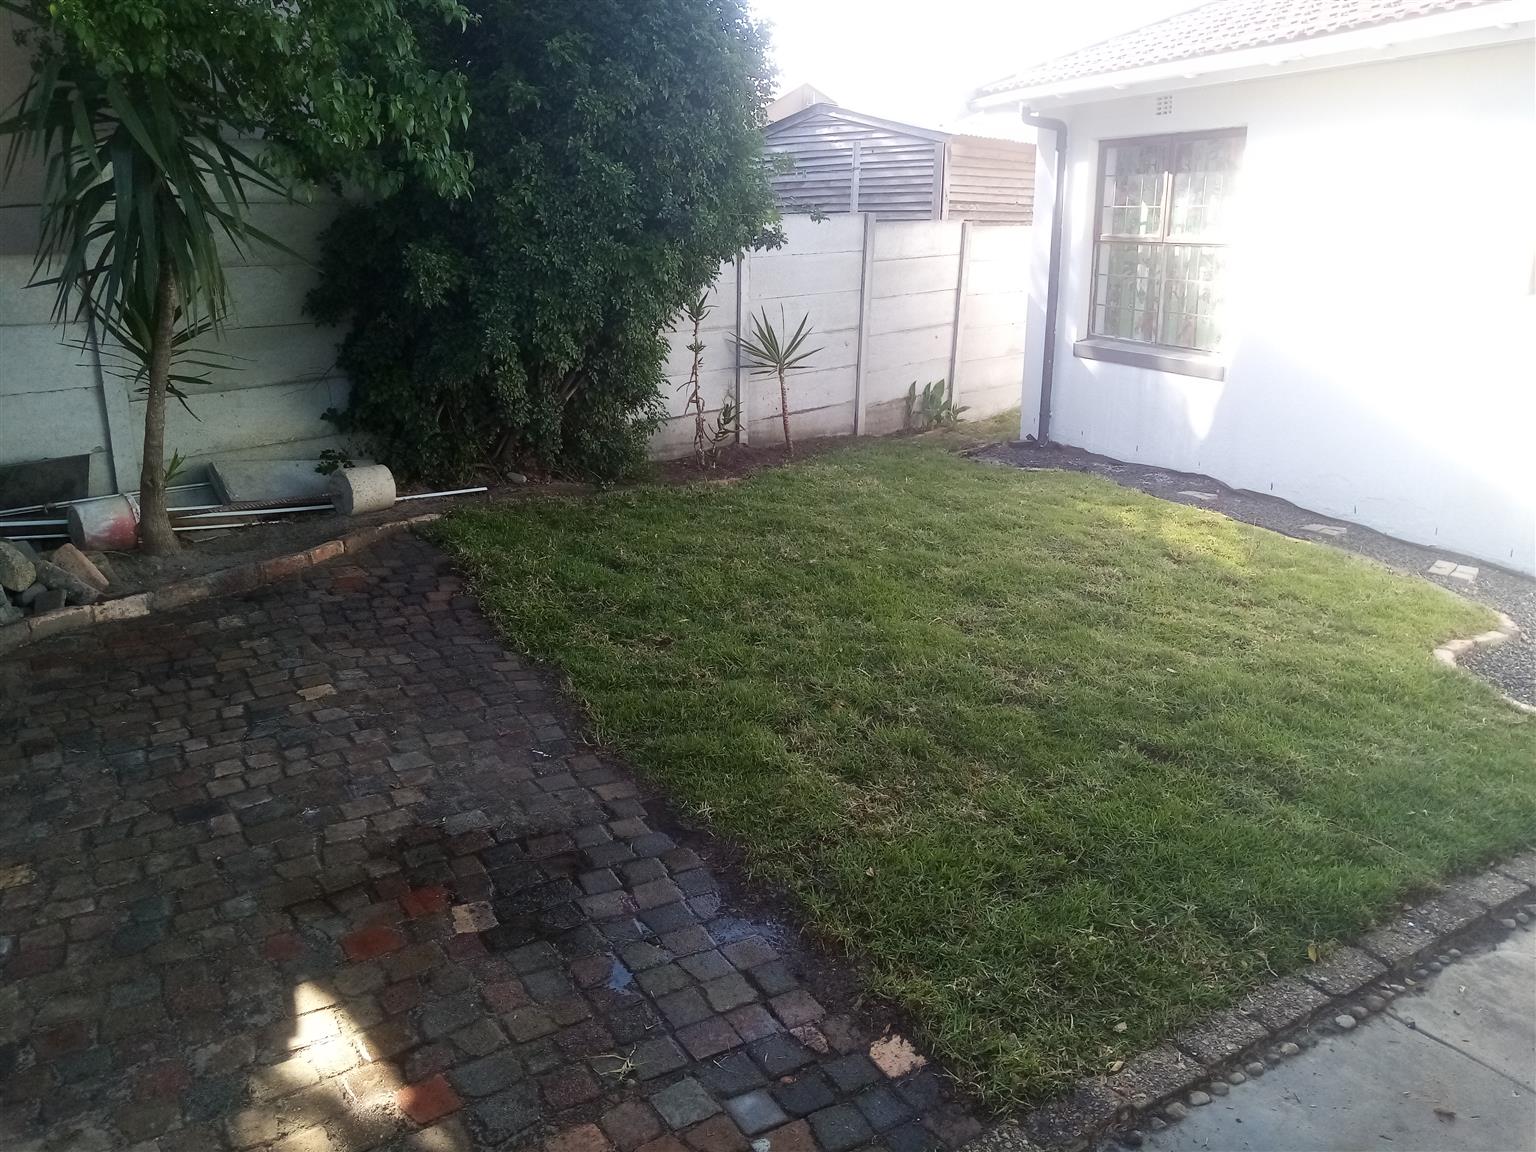 Fully furnished two bedroom house in Brackenfell to share. 